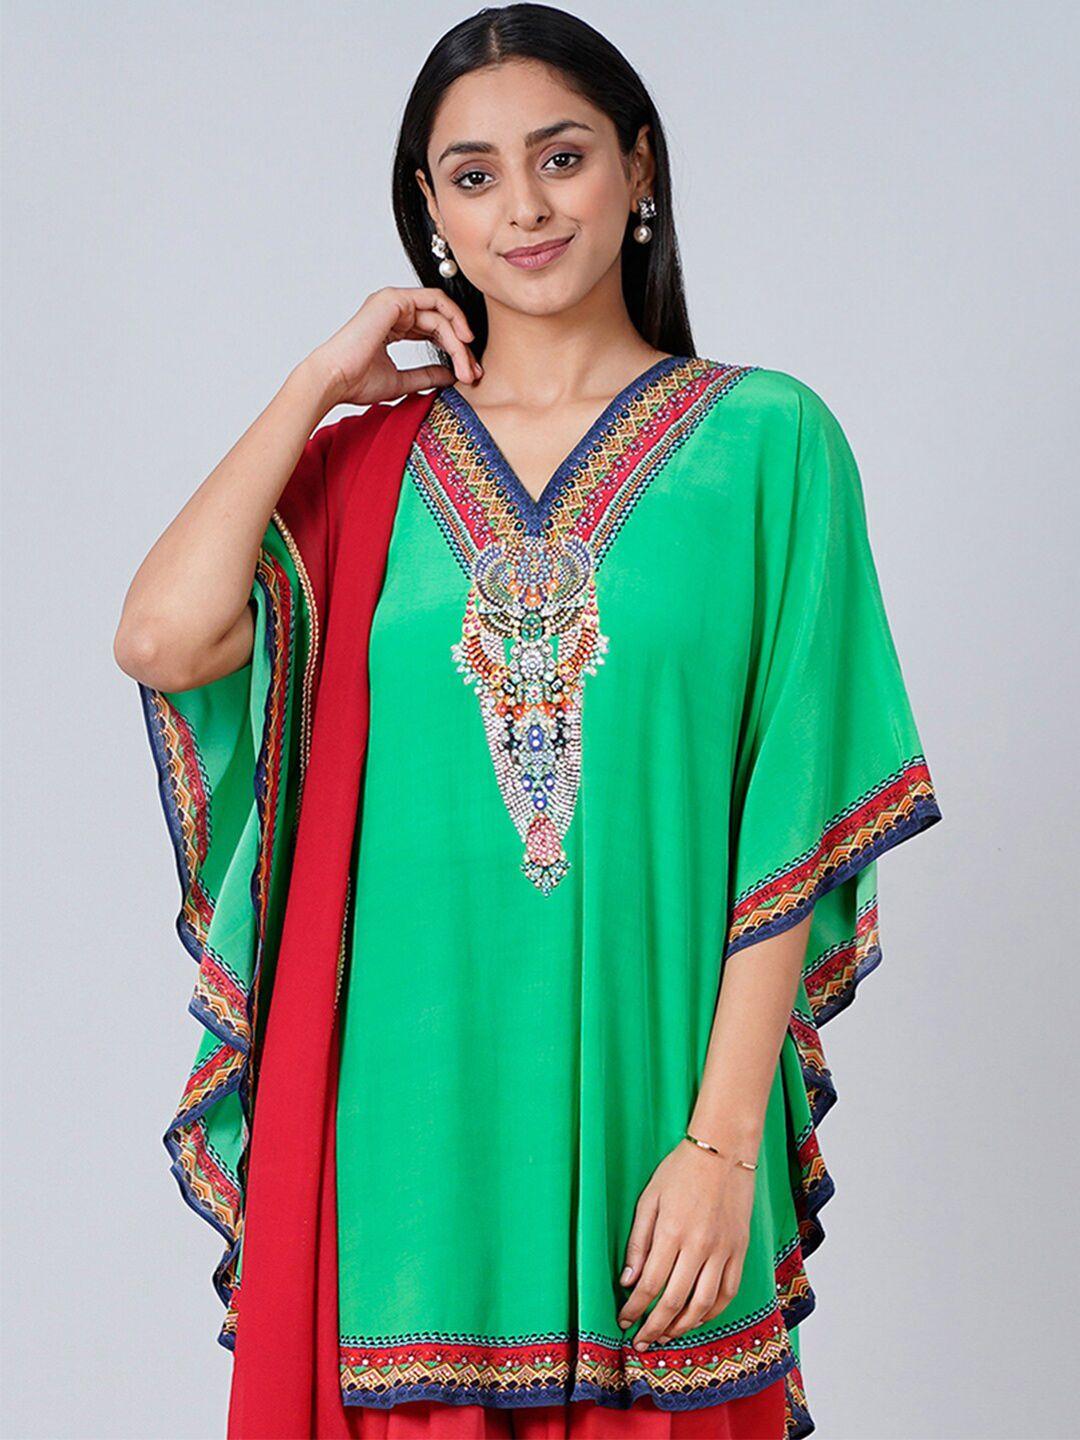 first-resort-by-ramola-bachchan-green-&-red-printed-embellished-tunic